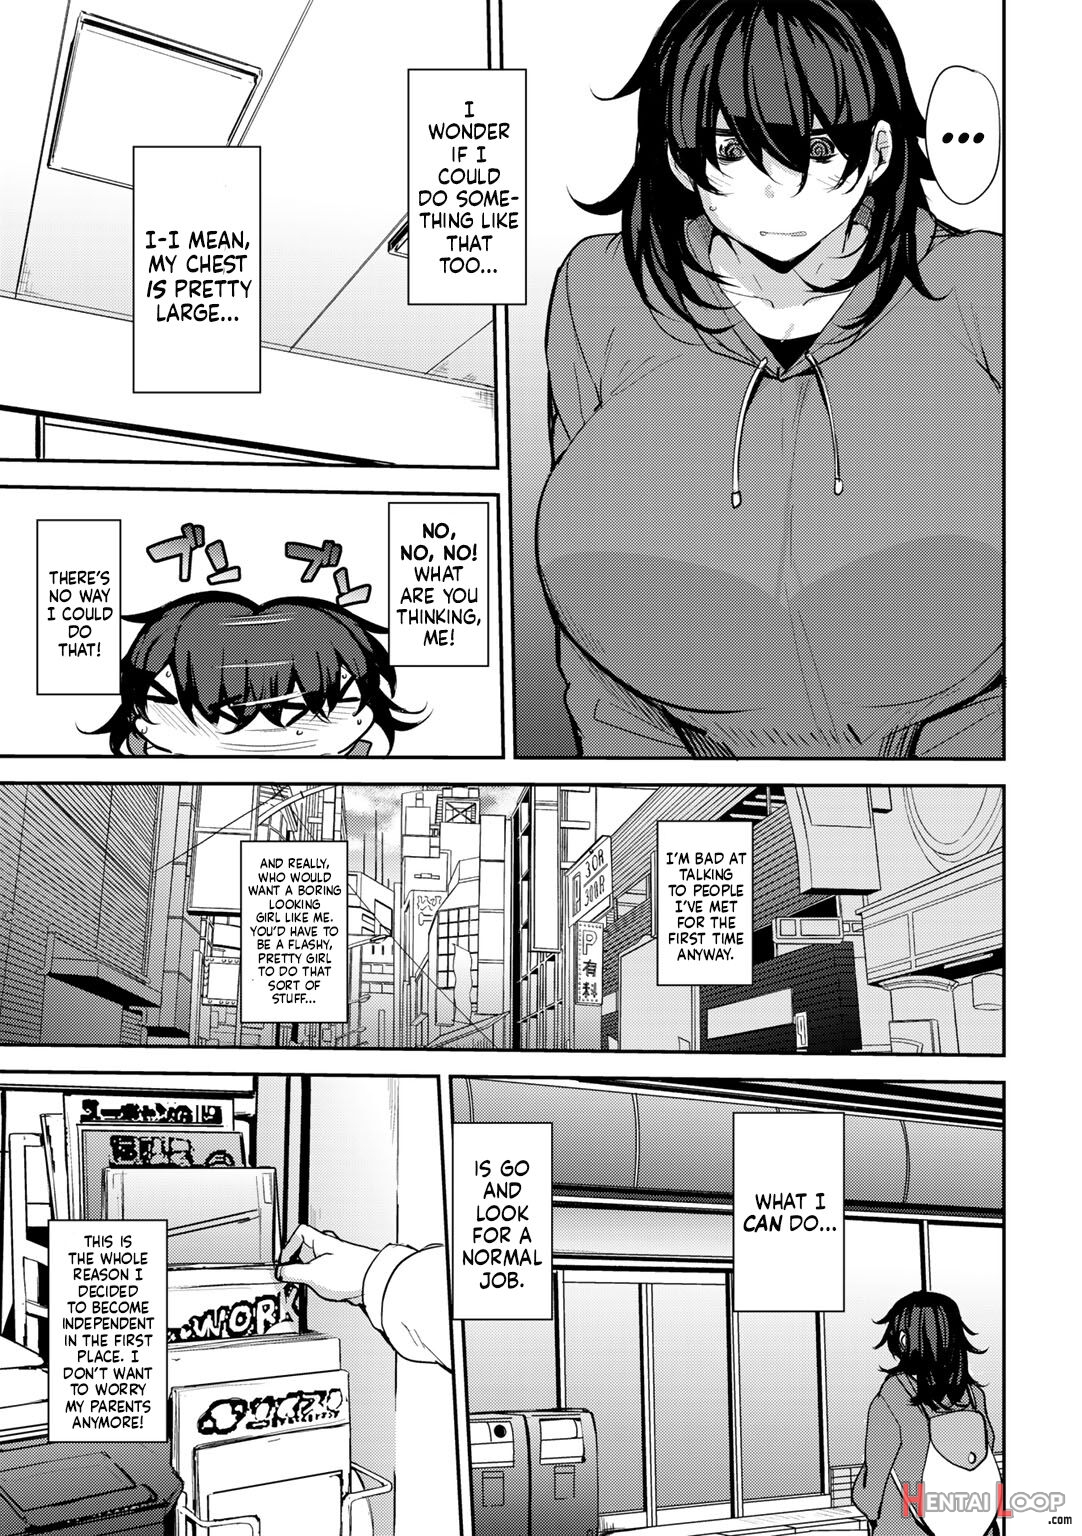 Maki's Coital Contract - Part 1 page 3